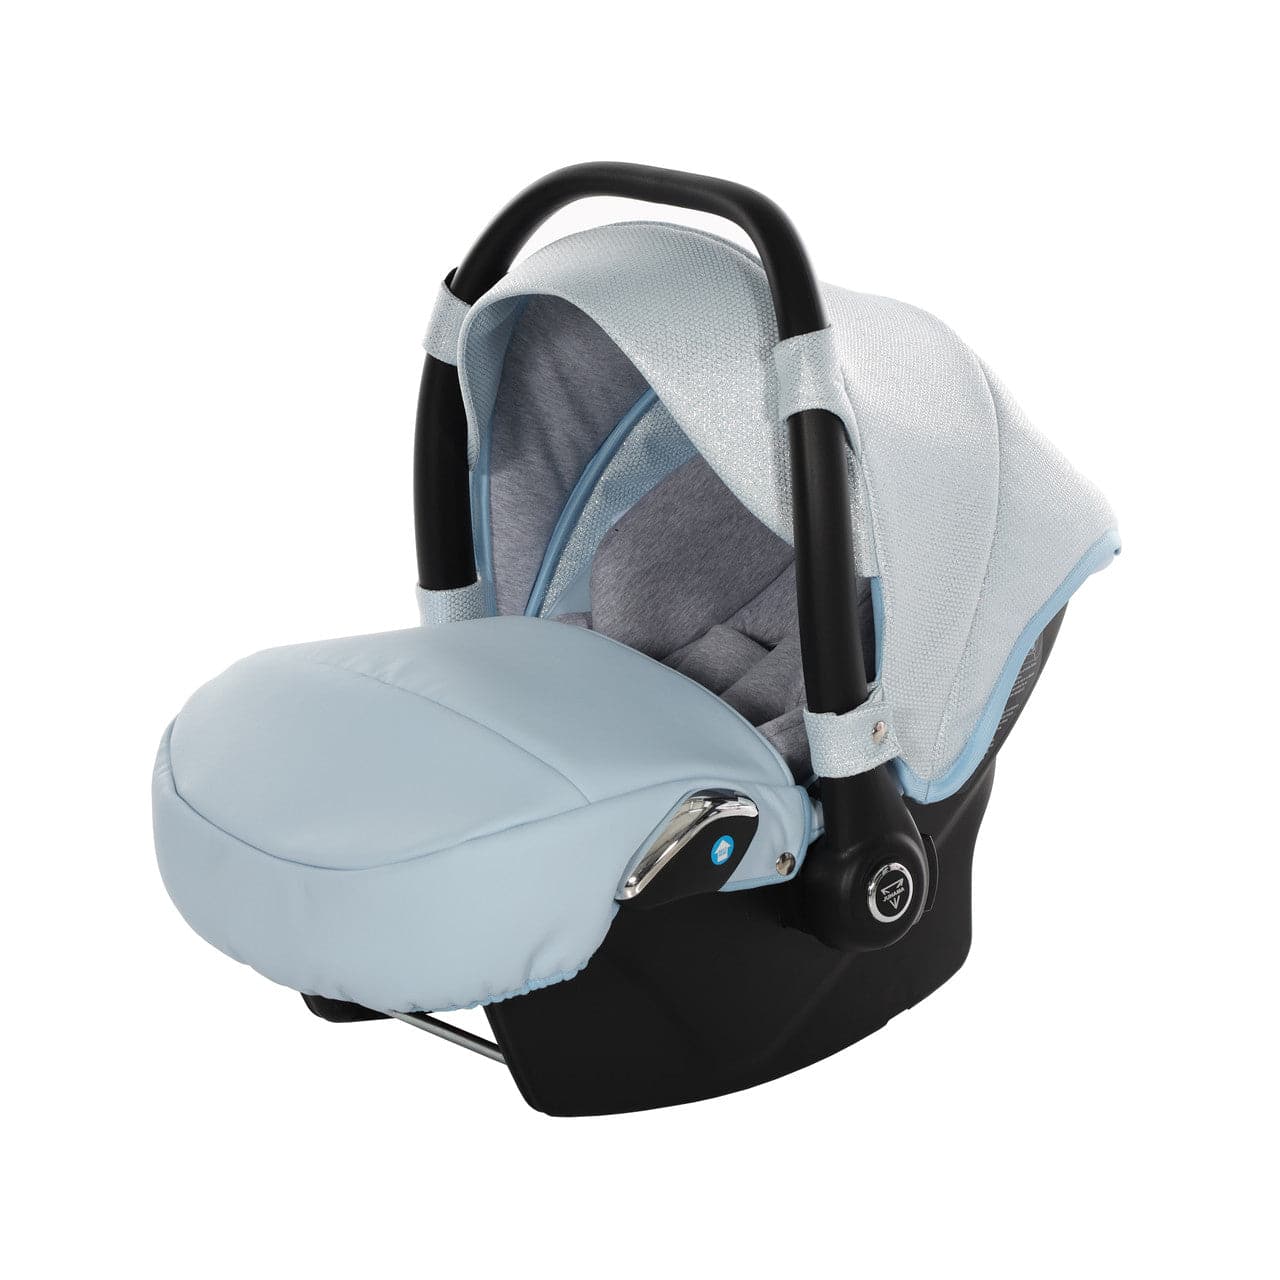 Junama Dolce 3 In 1 Travel System - Blue - For Your Little One